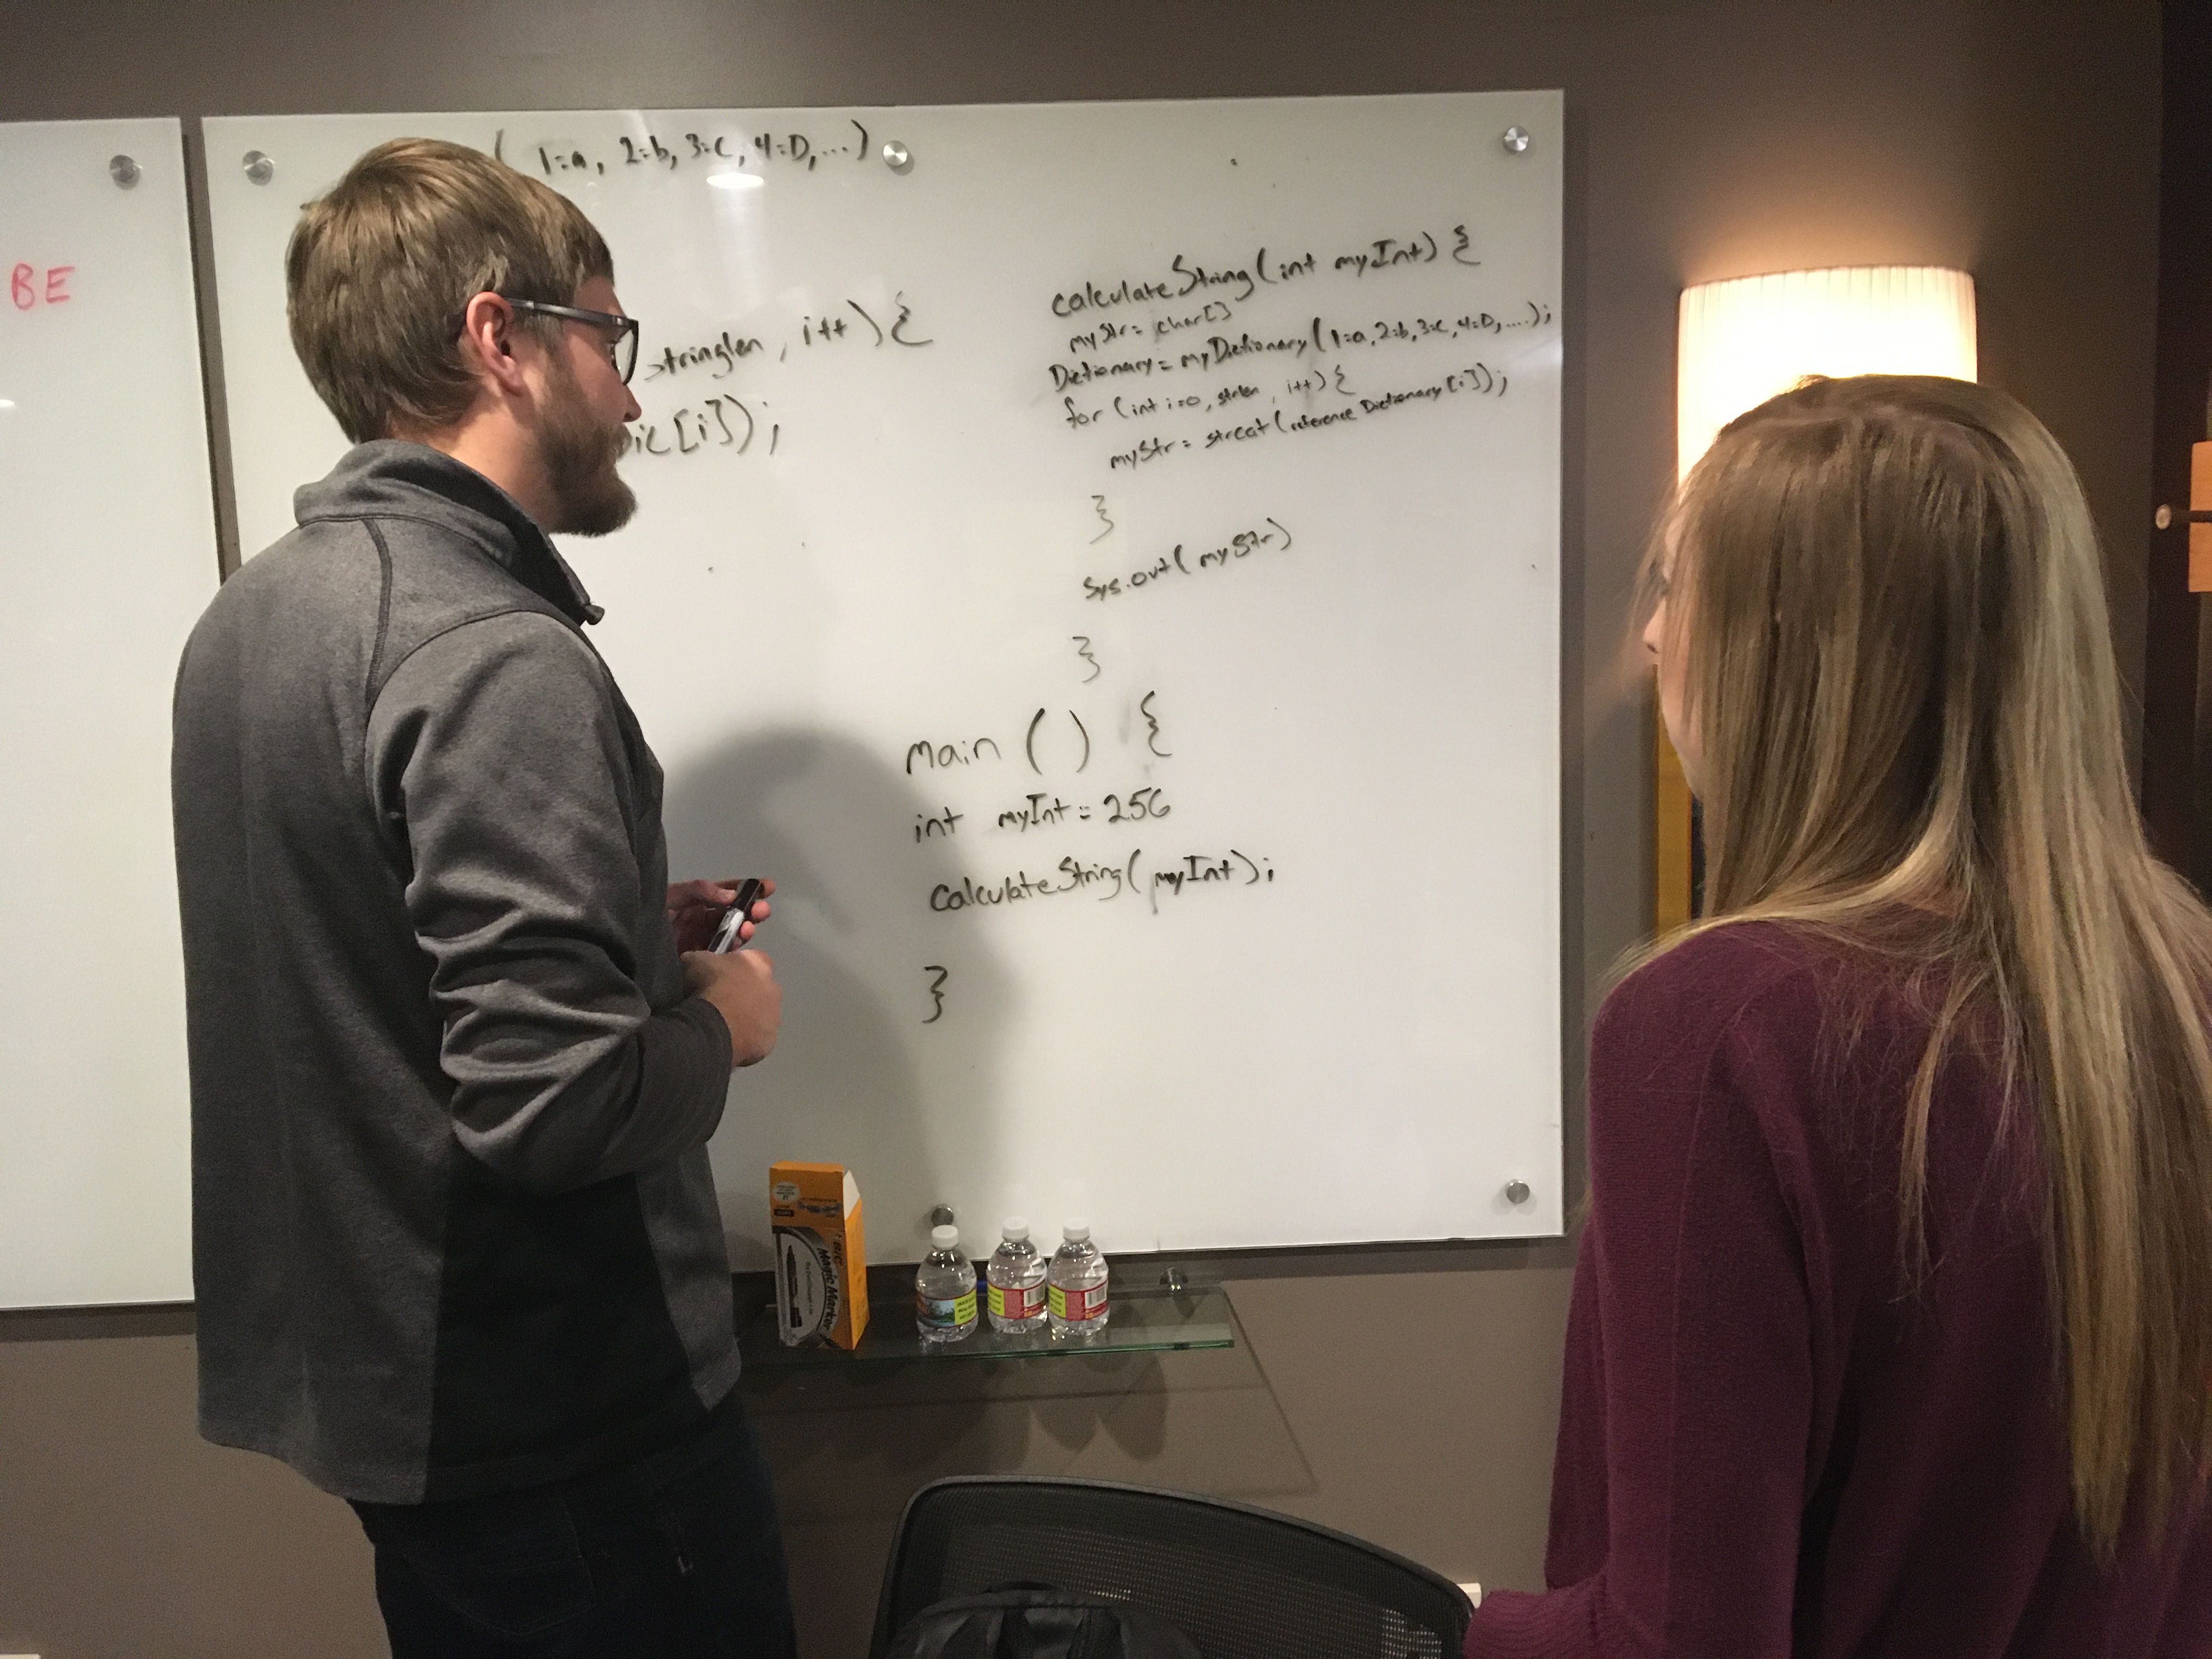 Man and a woman writing code on a whiteboard.